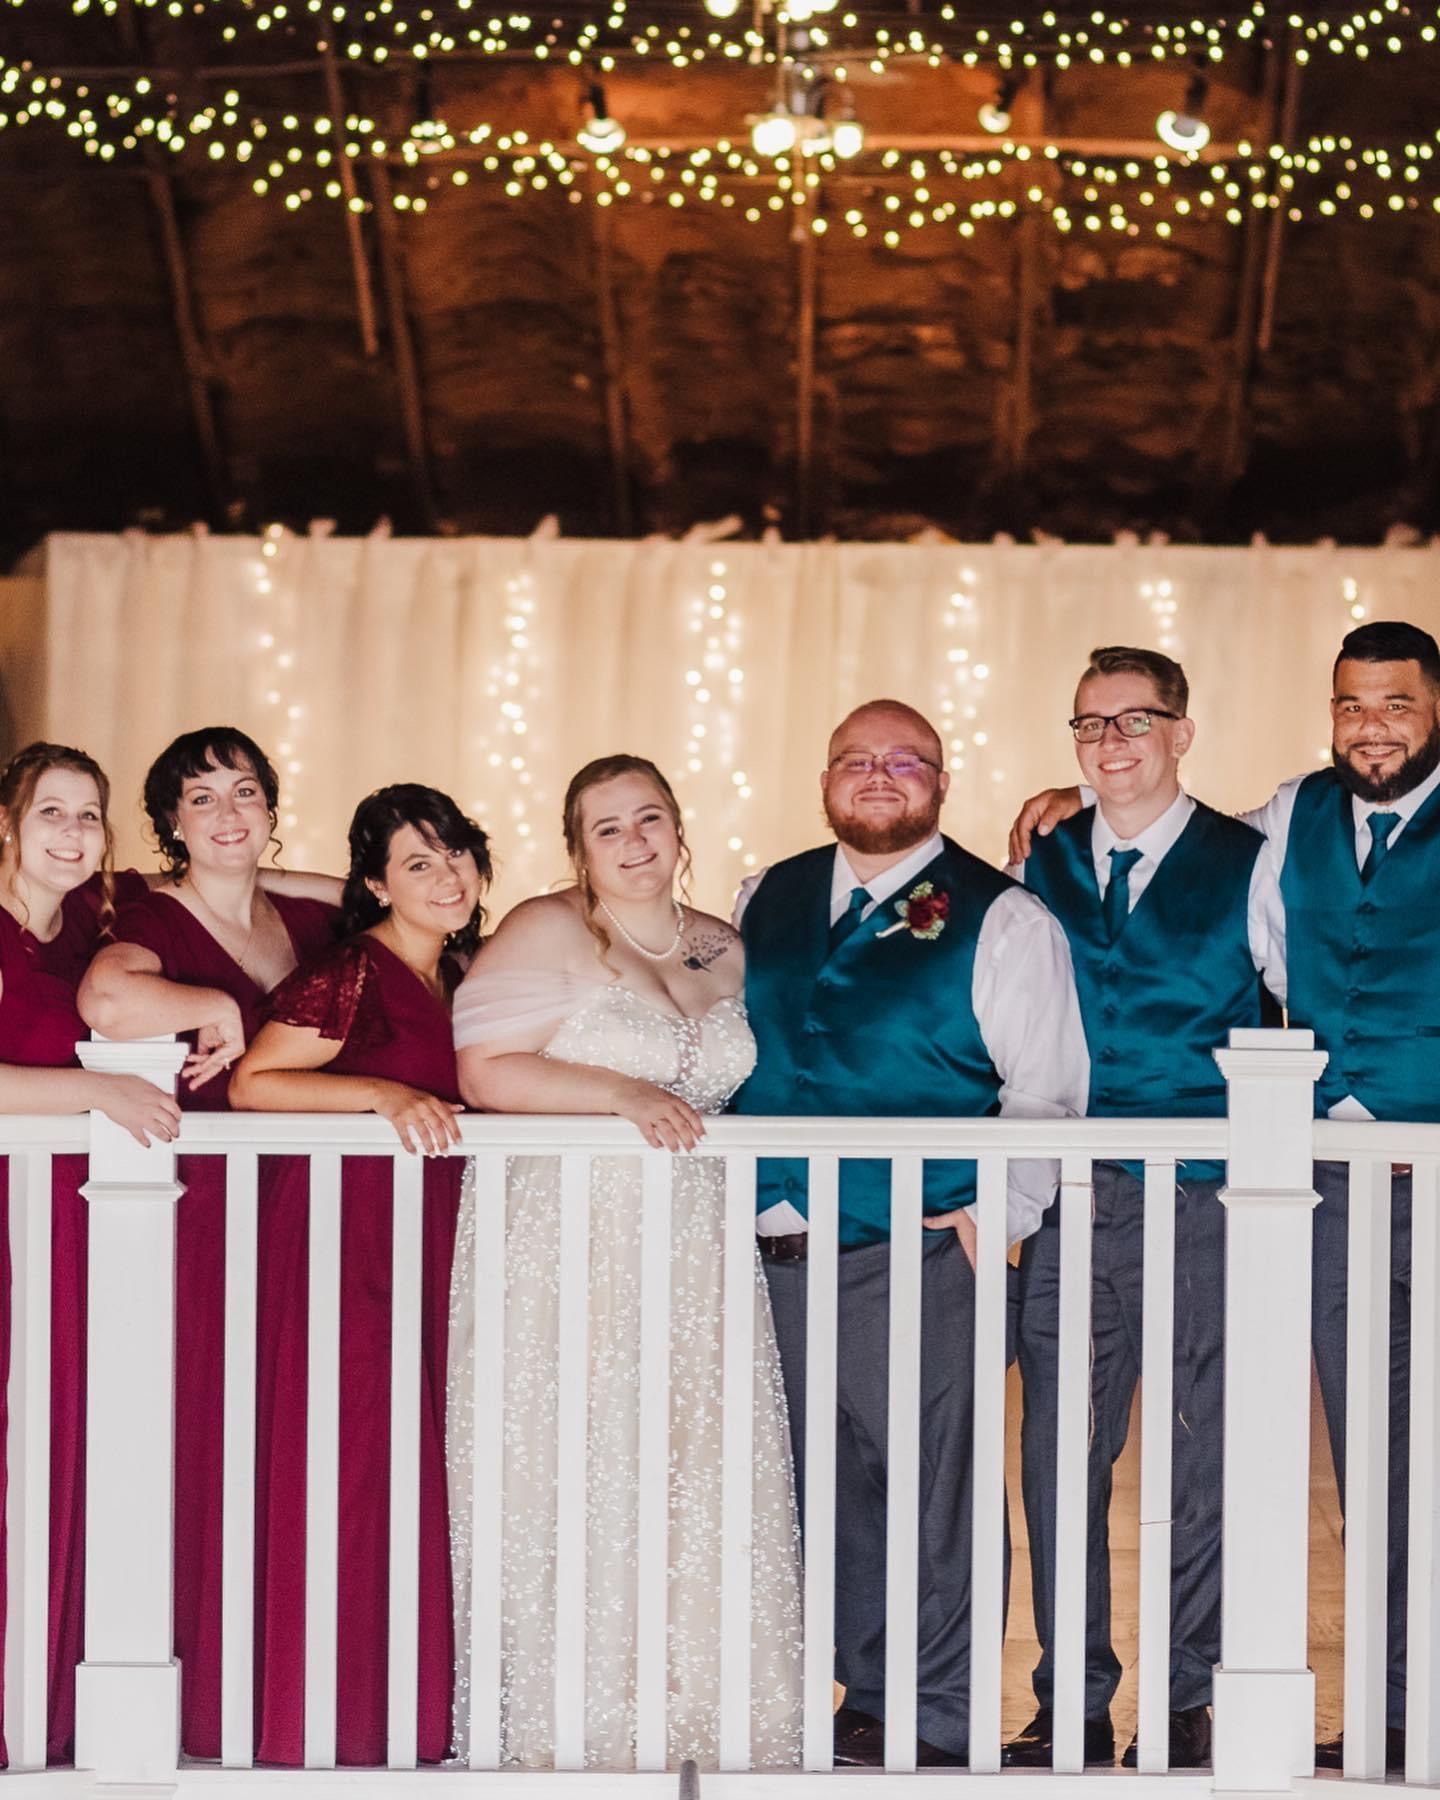 a bride and groom are posing for a picture with their wedding party on a balcony .